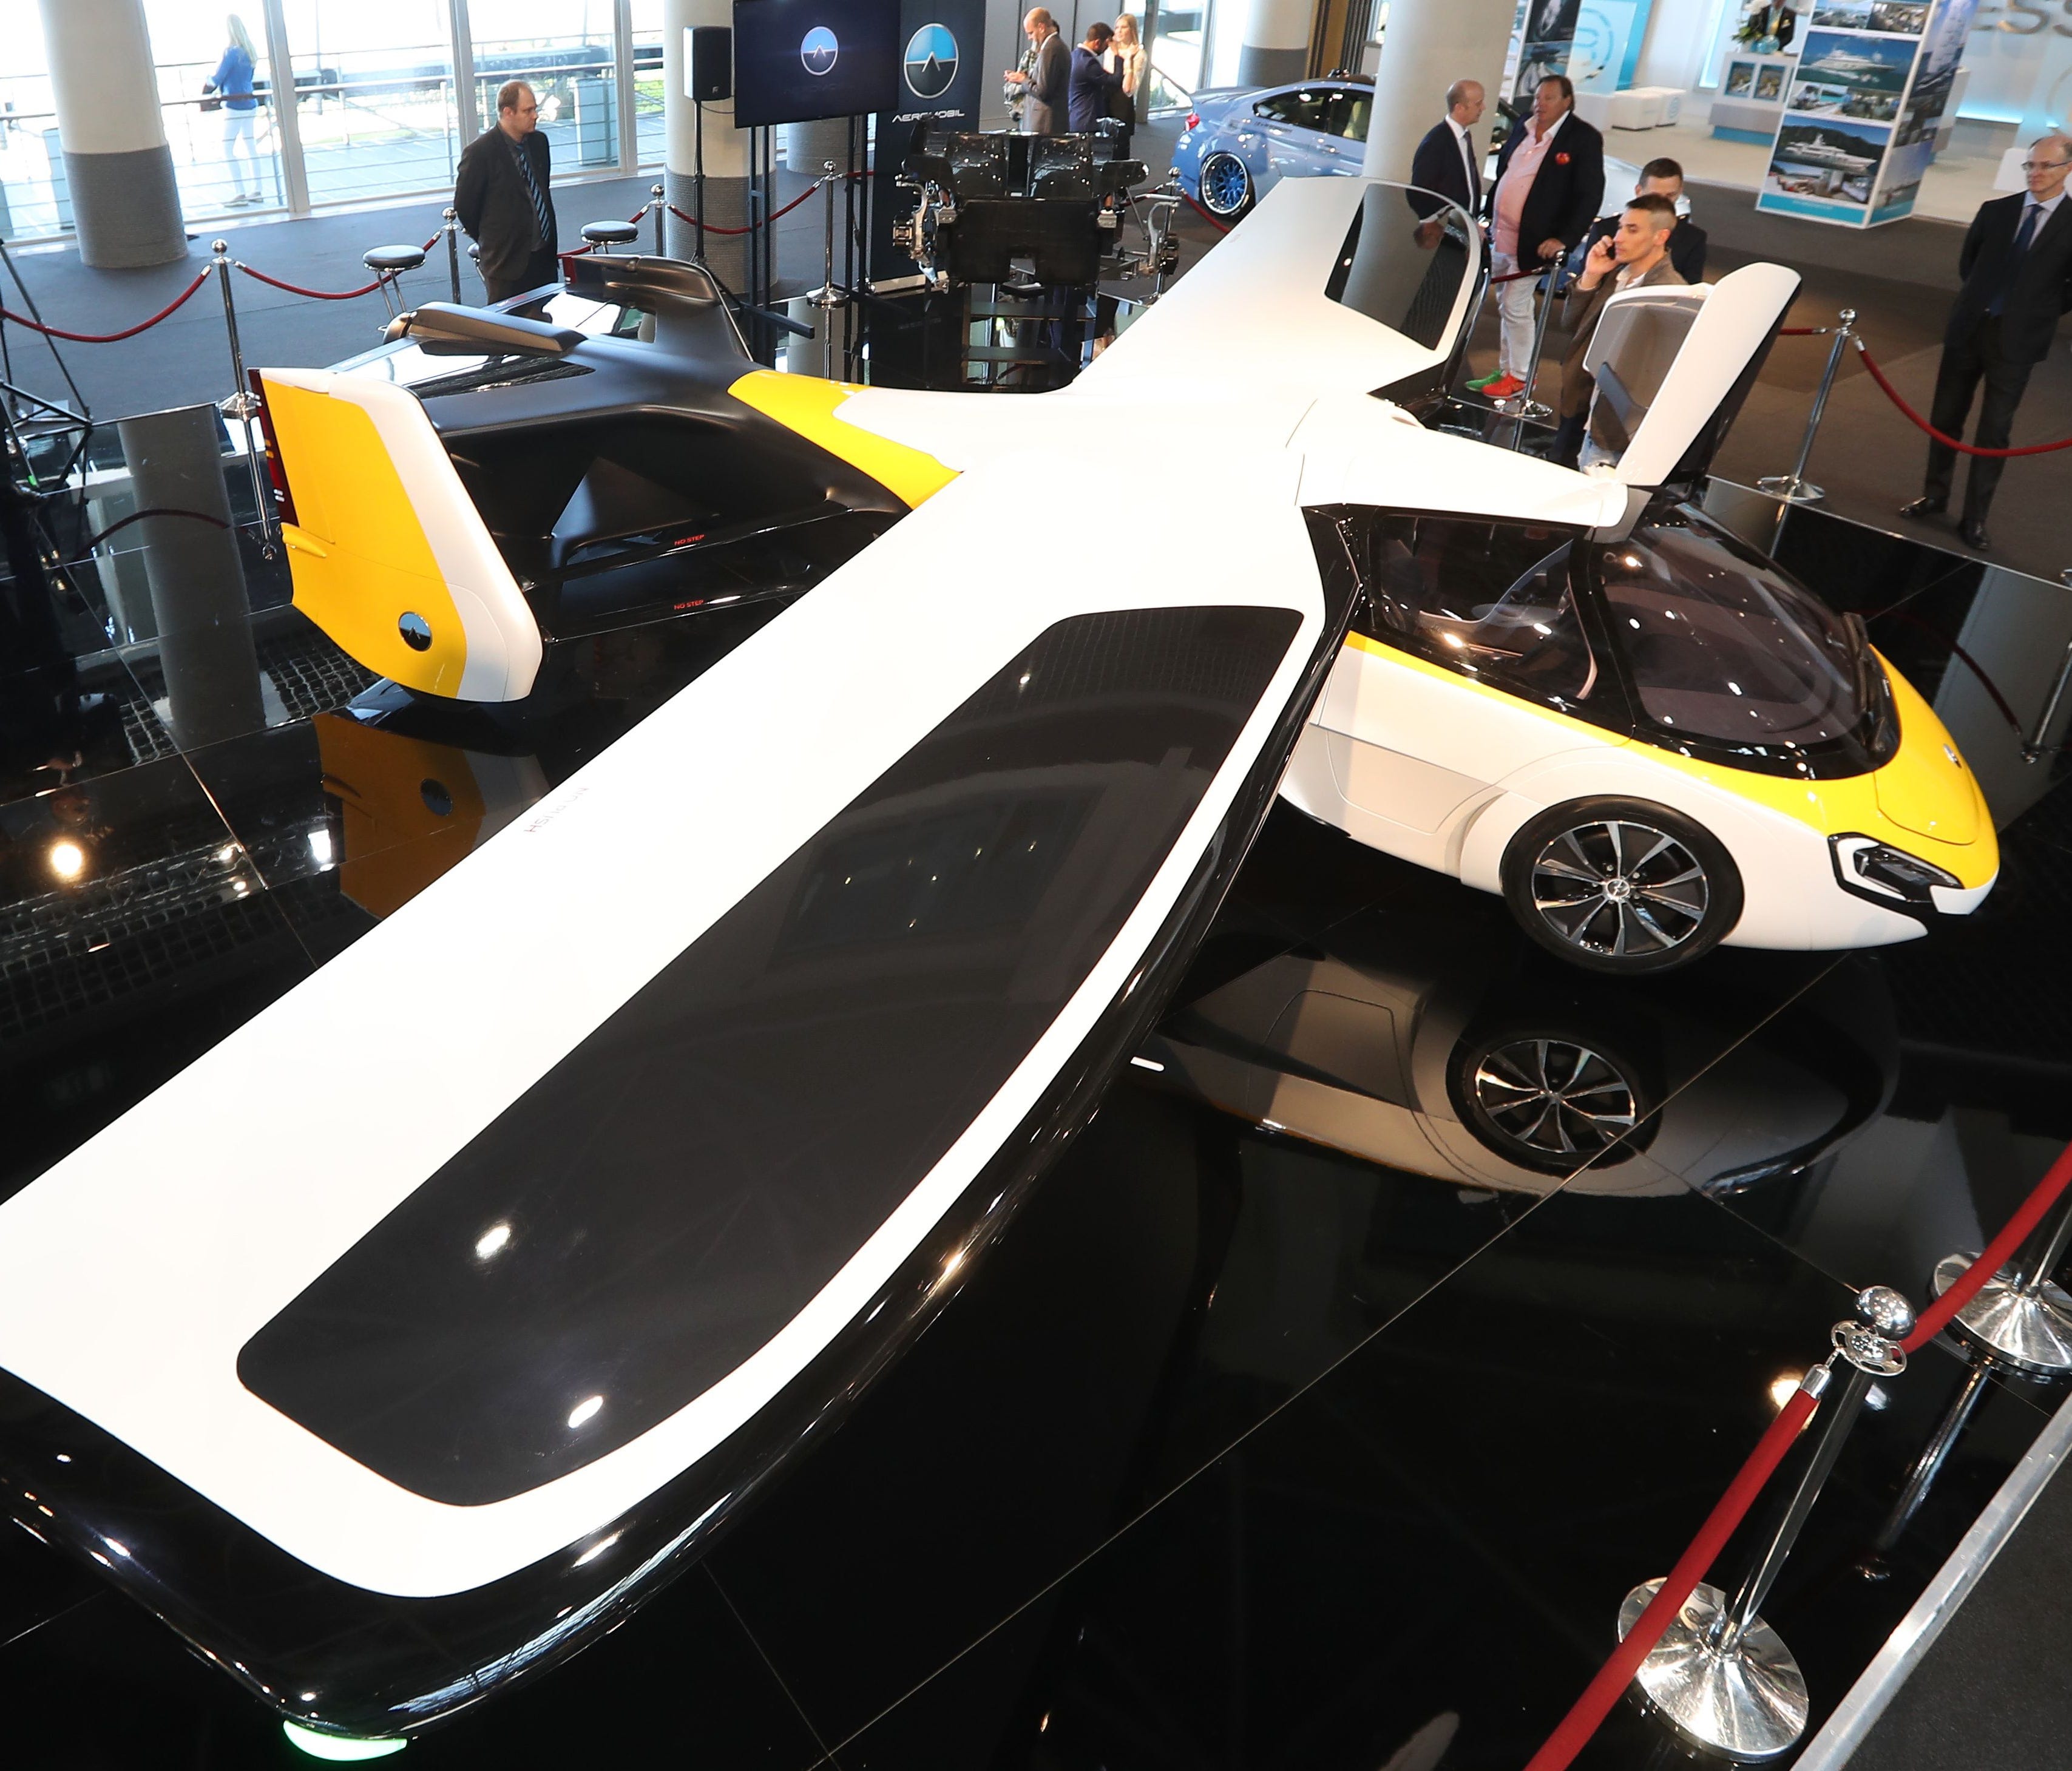 The Aeromobil, a flying supercar, is on display as part of the 